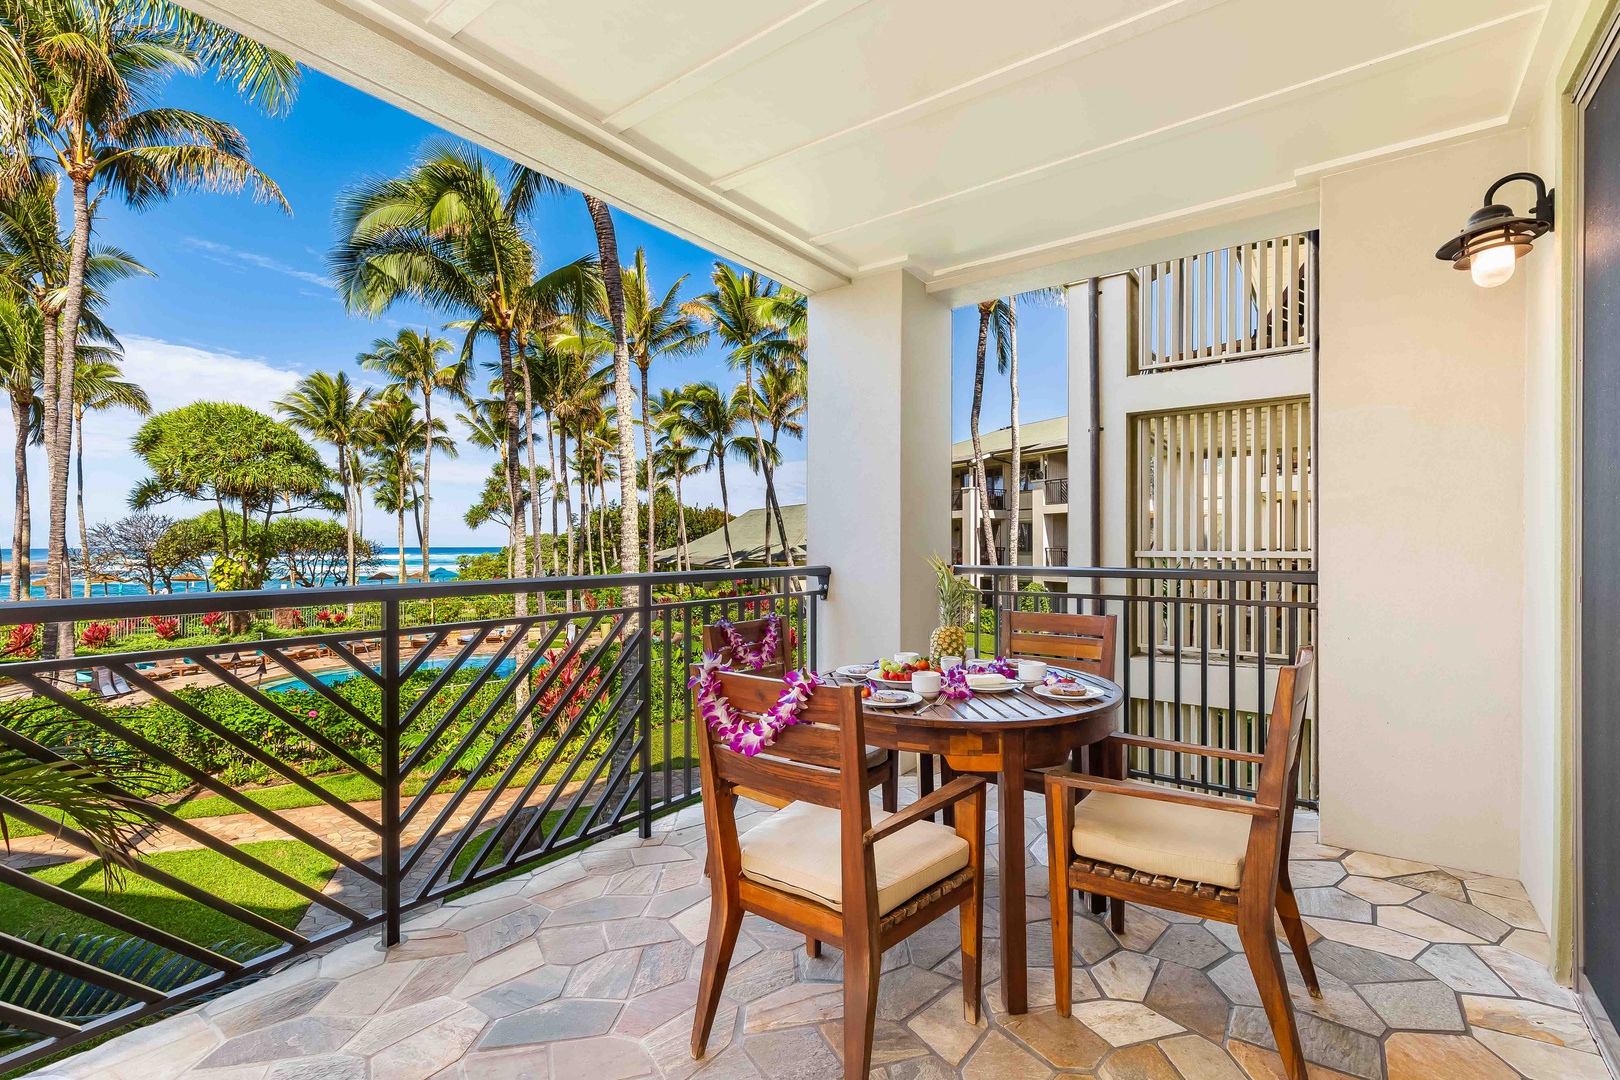 Kahuku Vacation Rentals, Turtle Bay Villas 210 - Lovely patio with outdoor furniture